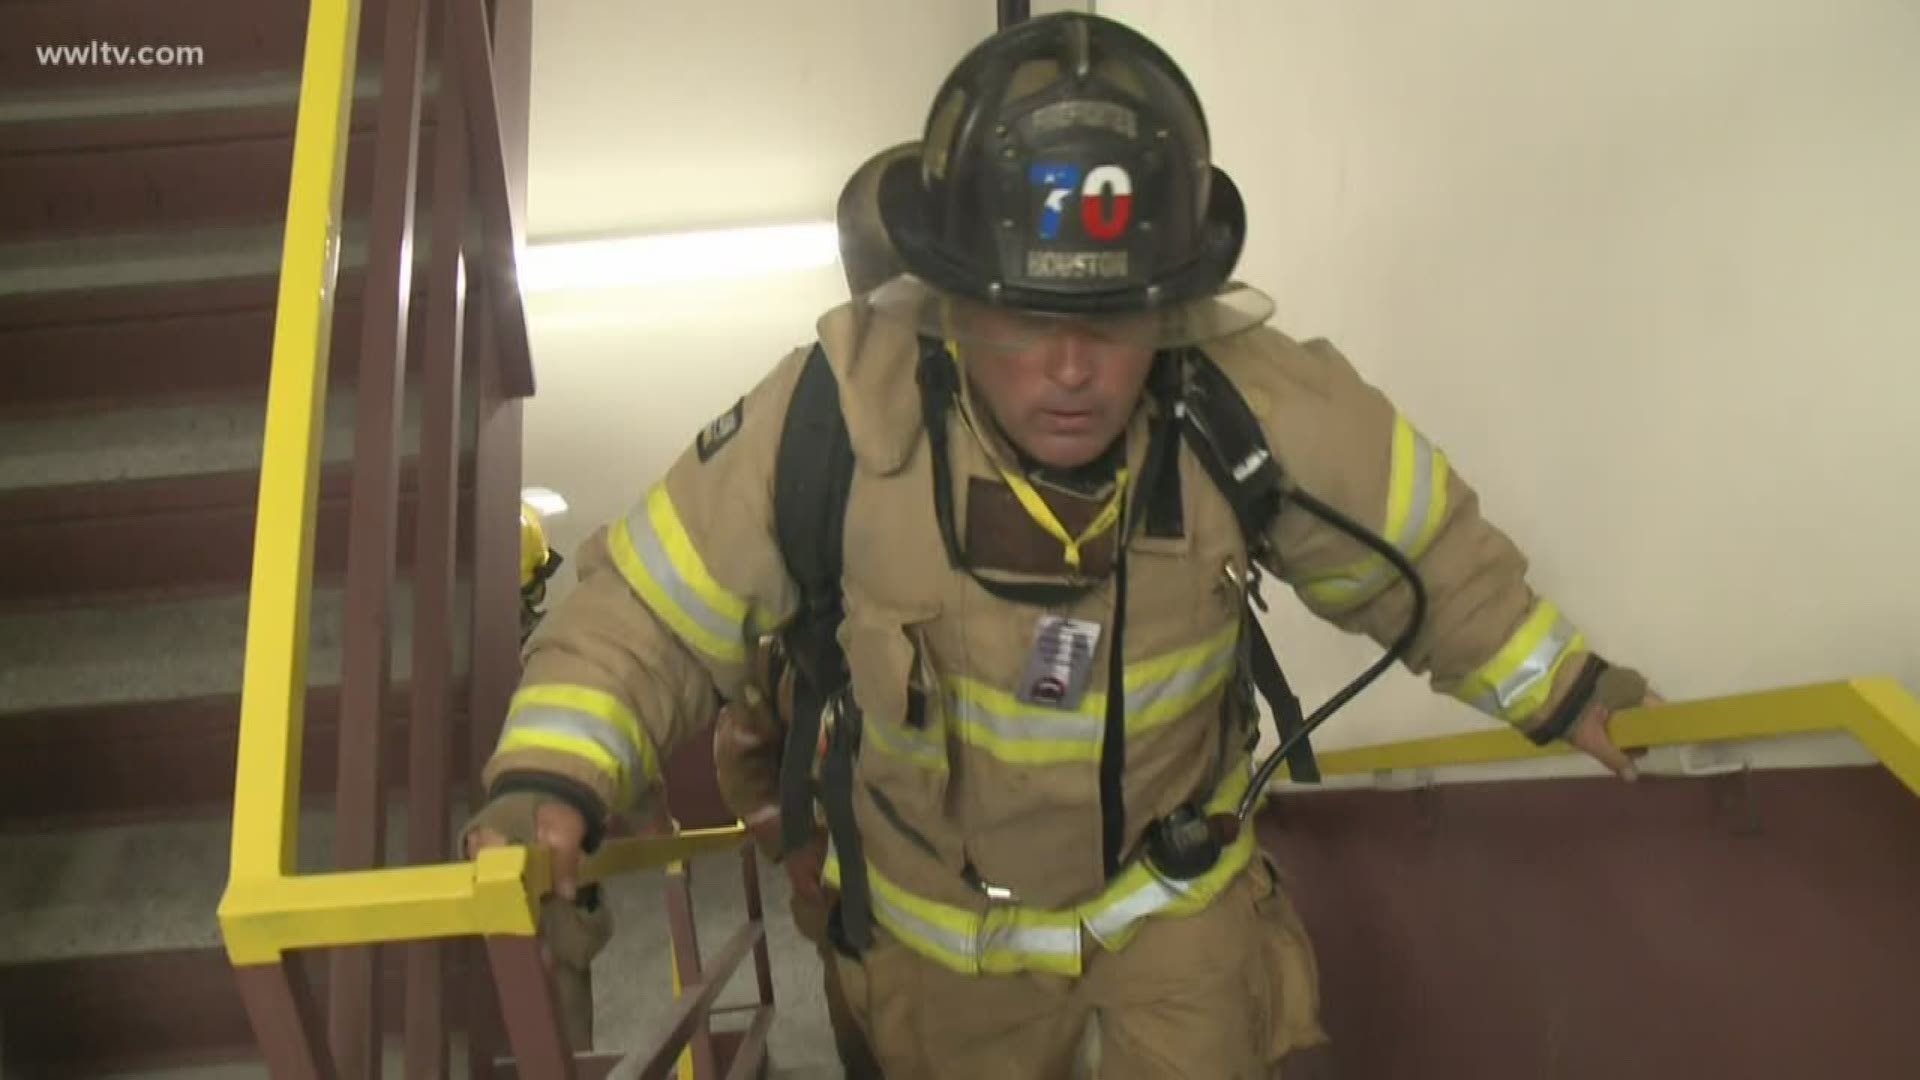 A group of local firefighters spent Wednesday climbing 110 flights of stairs at Poydras Tower to pay tribute to the hundreds of first responders who paid the ultimate price while trying to save lives on Sept. 11, 2001.